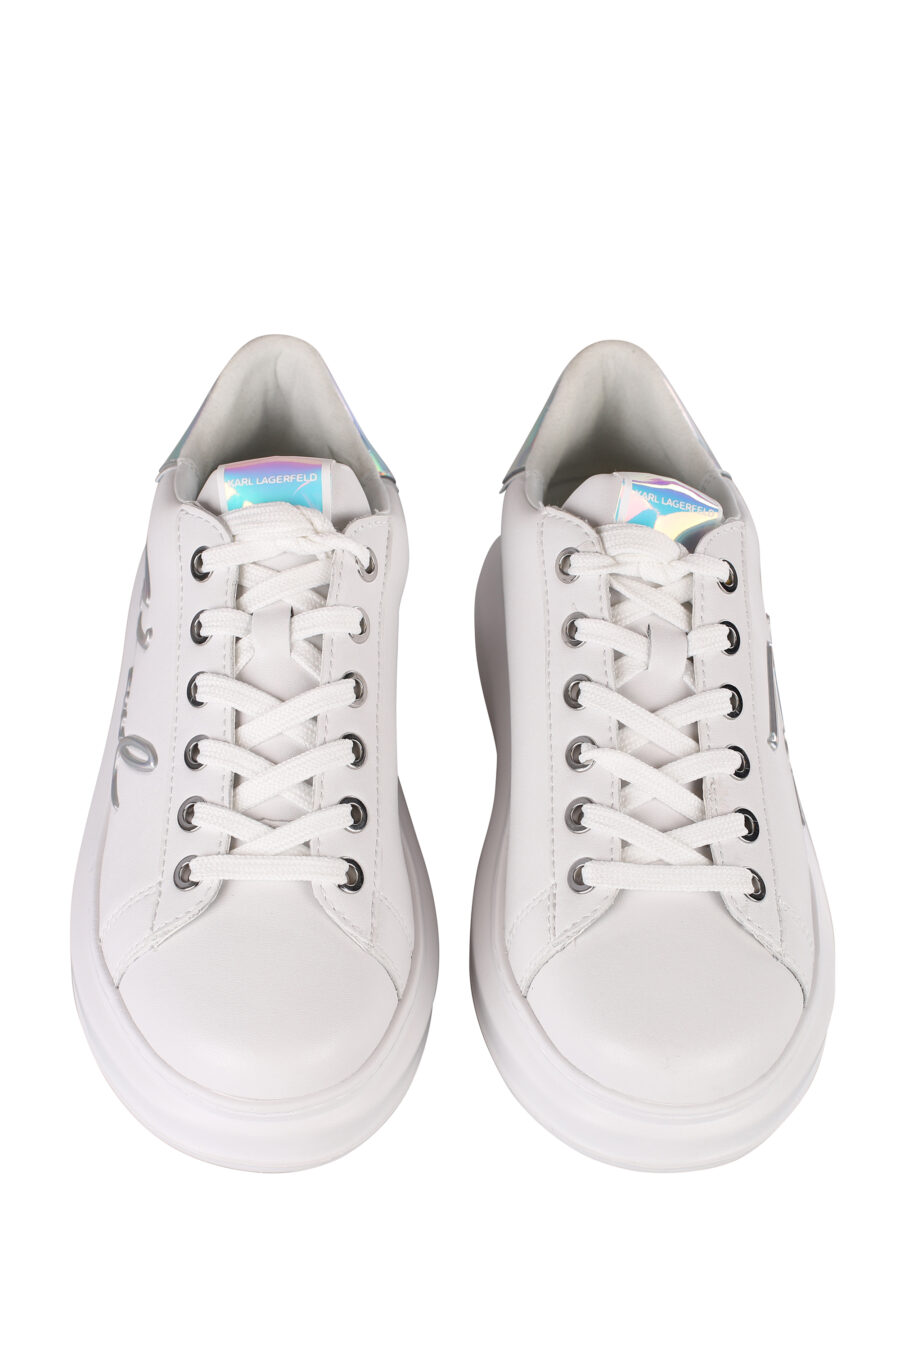 White trainers with white logo and iridescent detail - IMG 1400